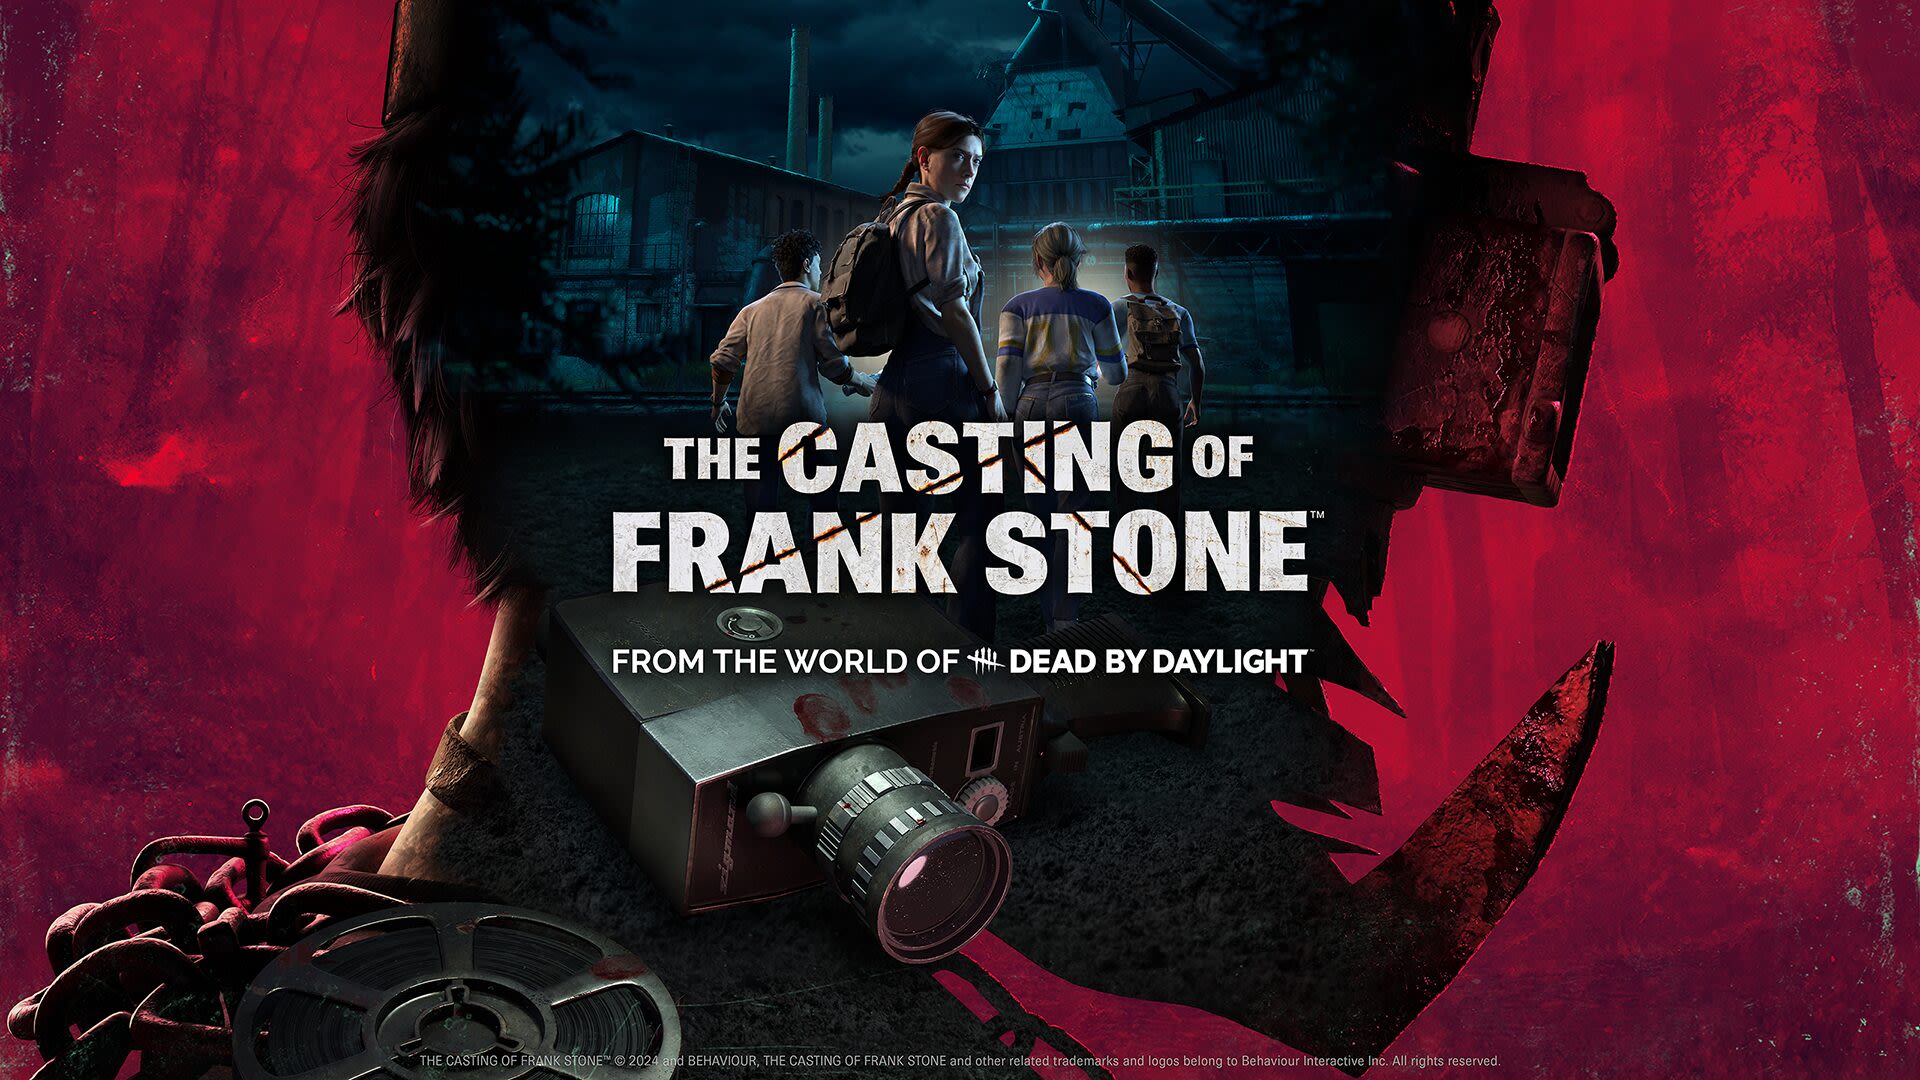 The Casting of Frank Stone ‘Gameplay’ trailer, screenshots